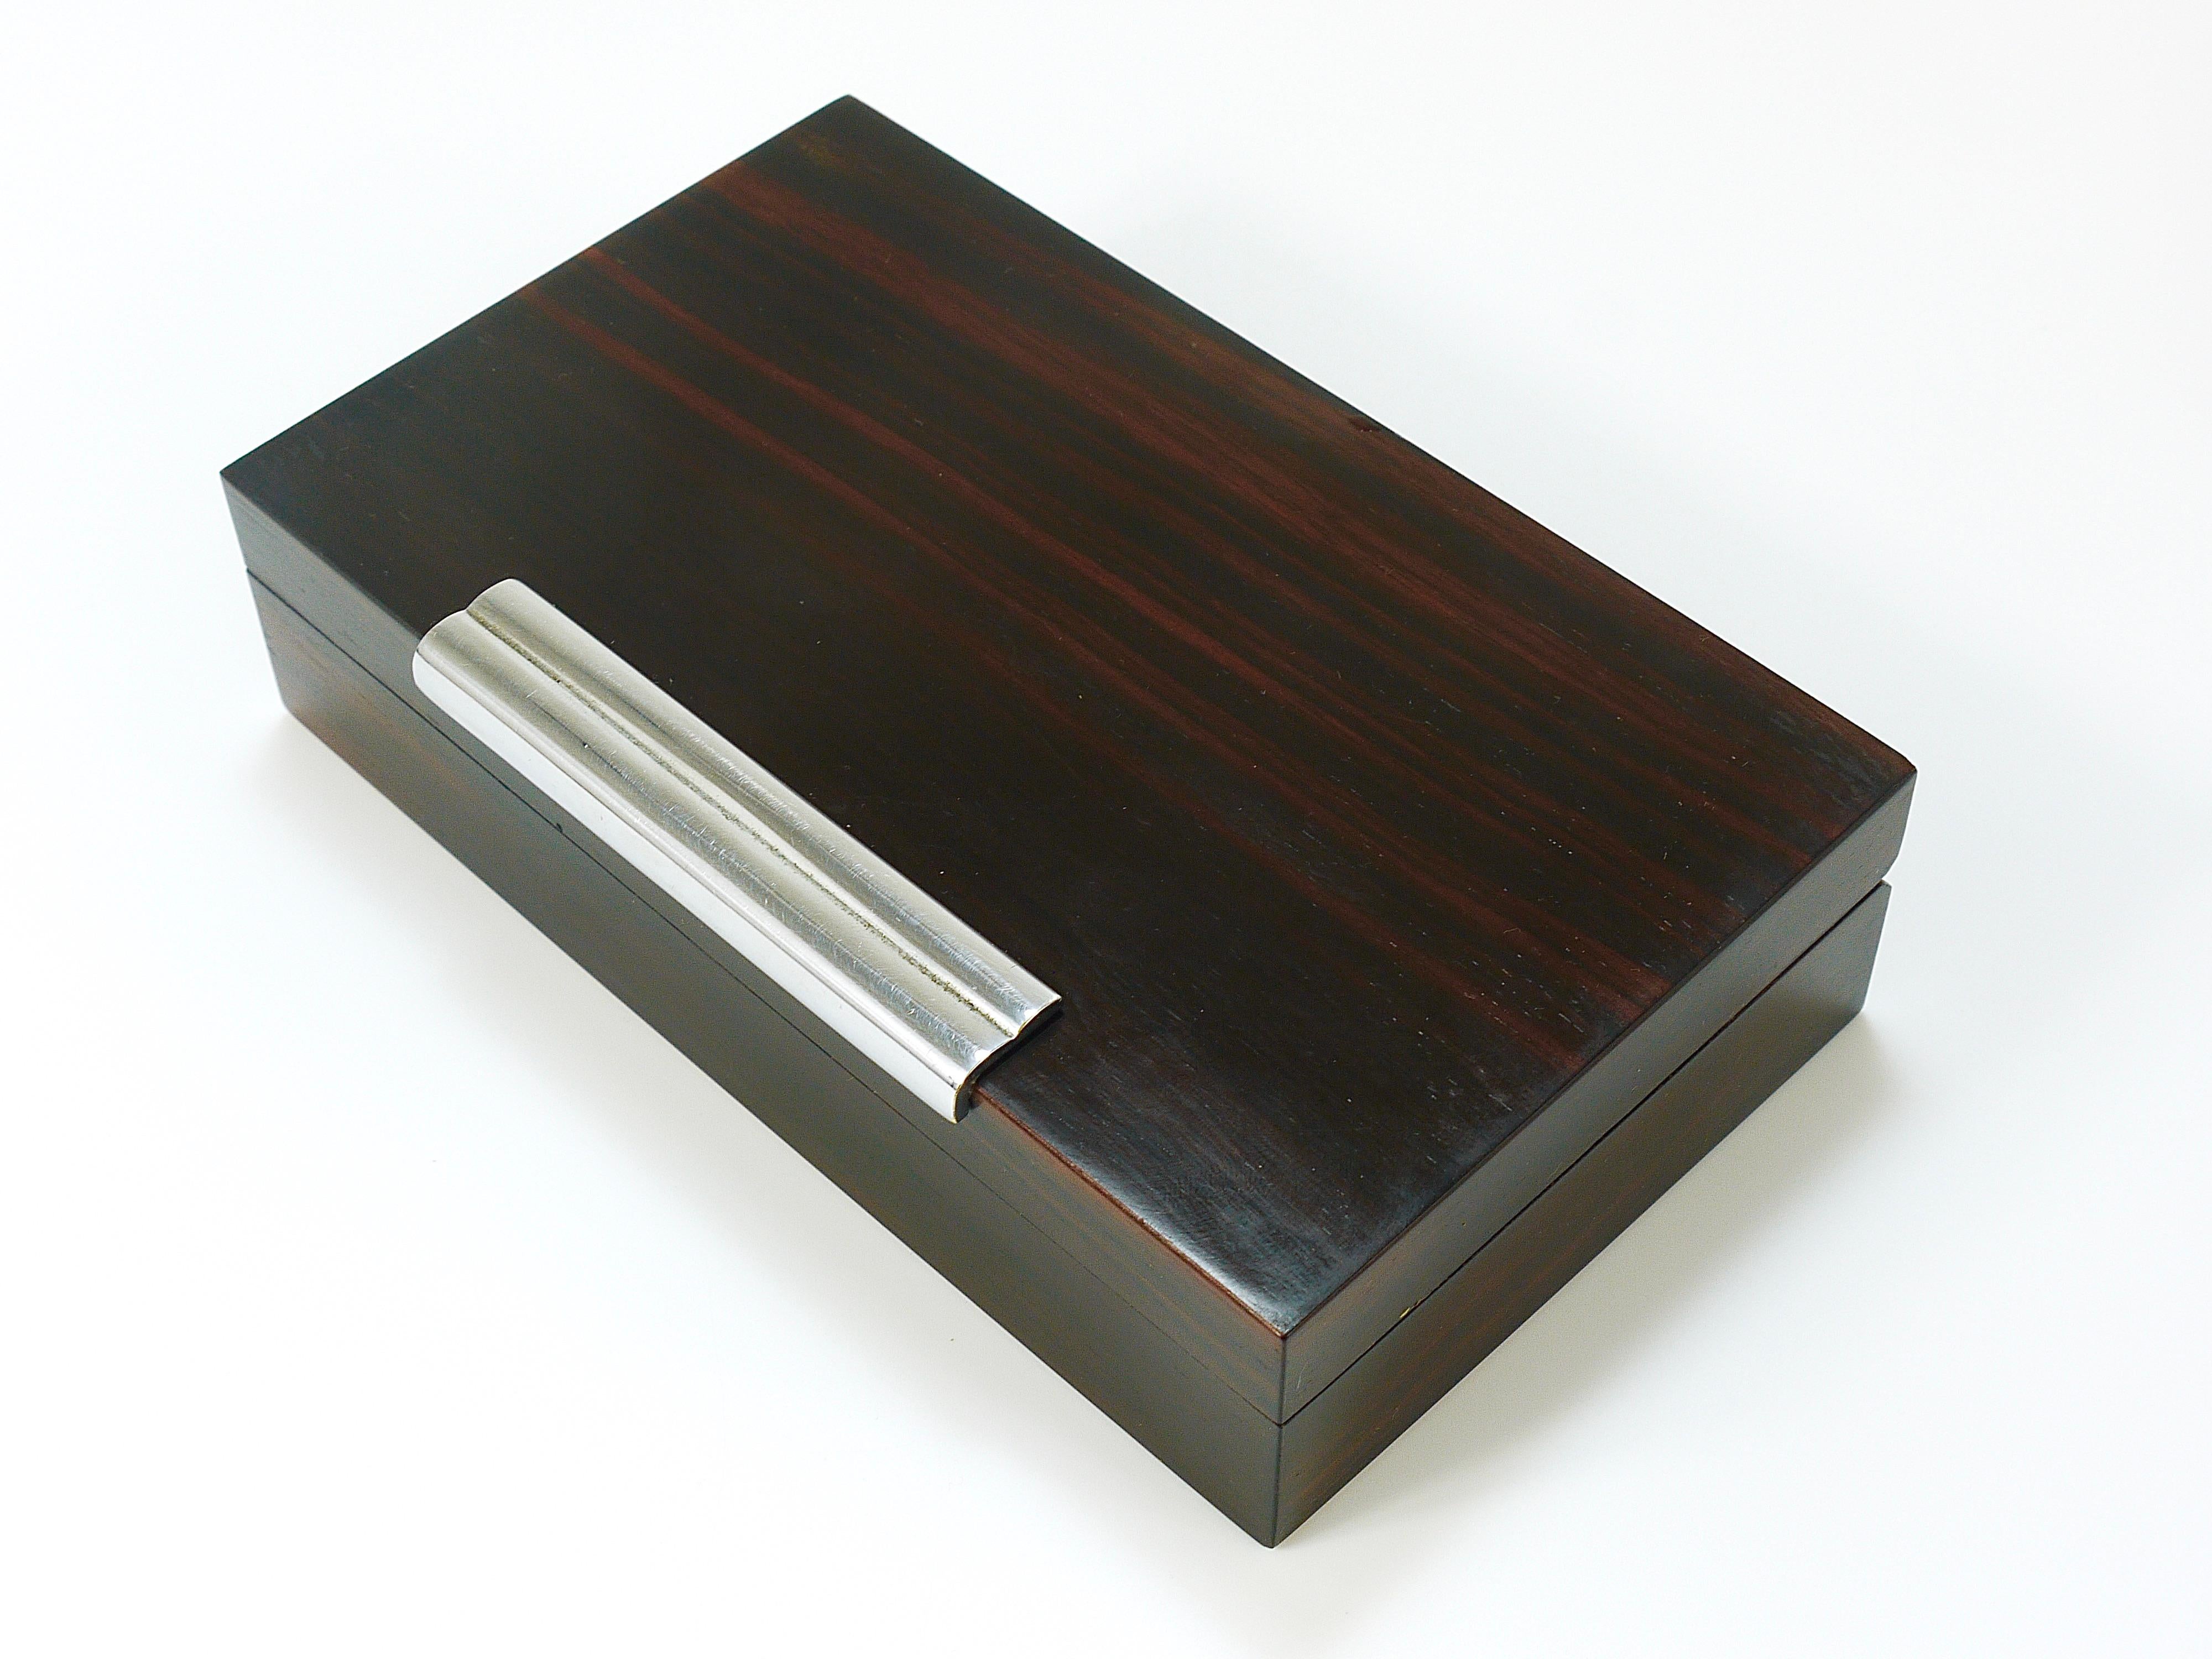 French Art Deco Rosewood & Nickel Storage Box, Maison Desny Style, France, 1930s For Sale 8